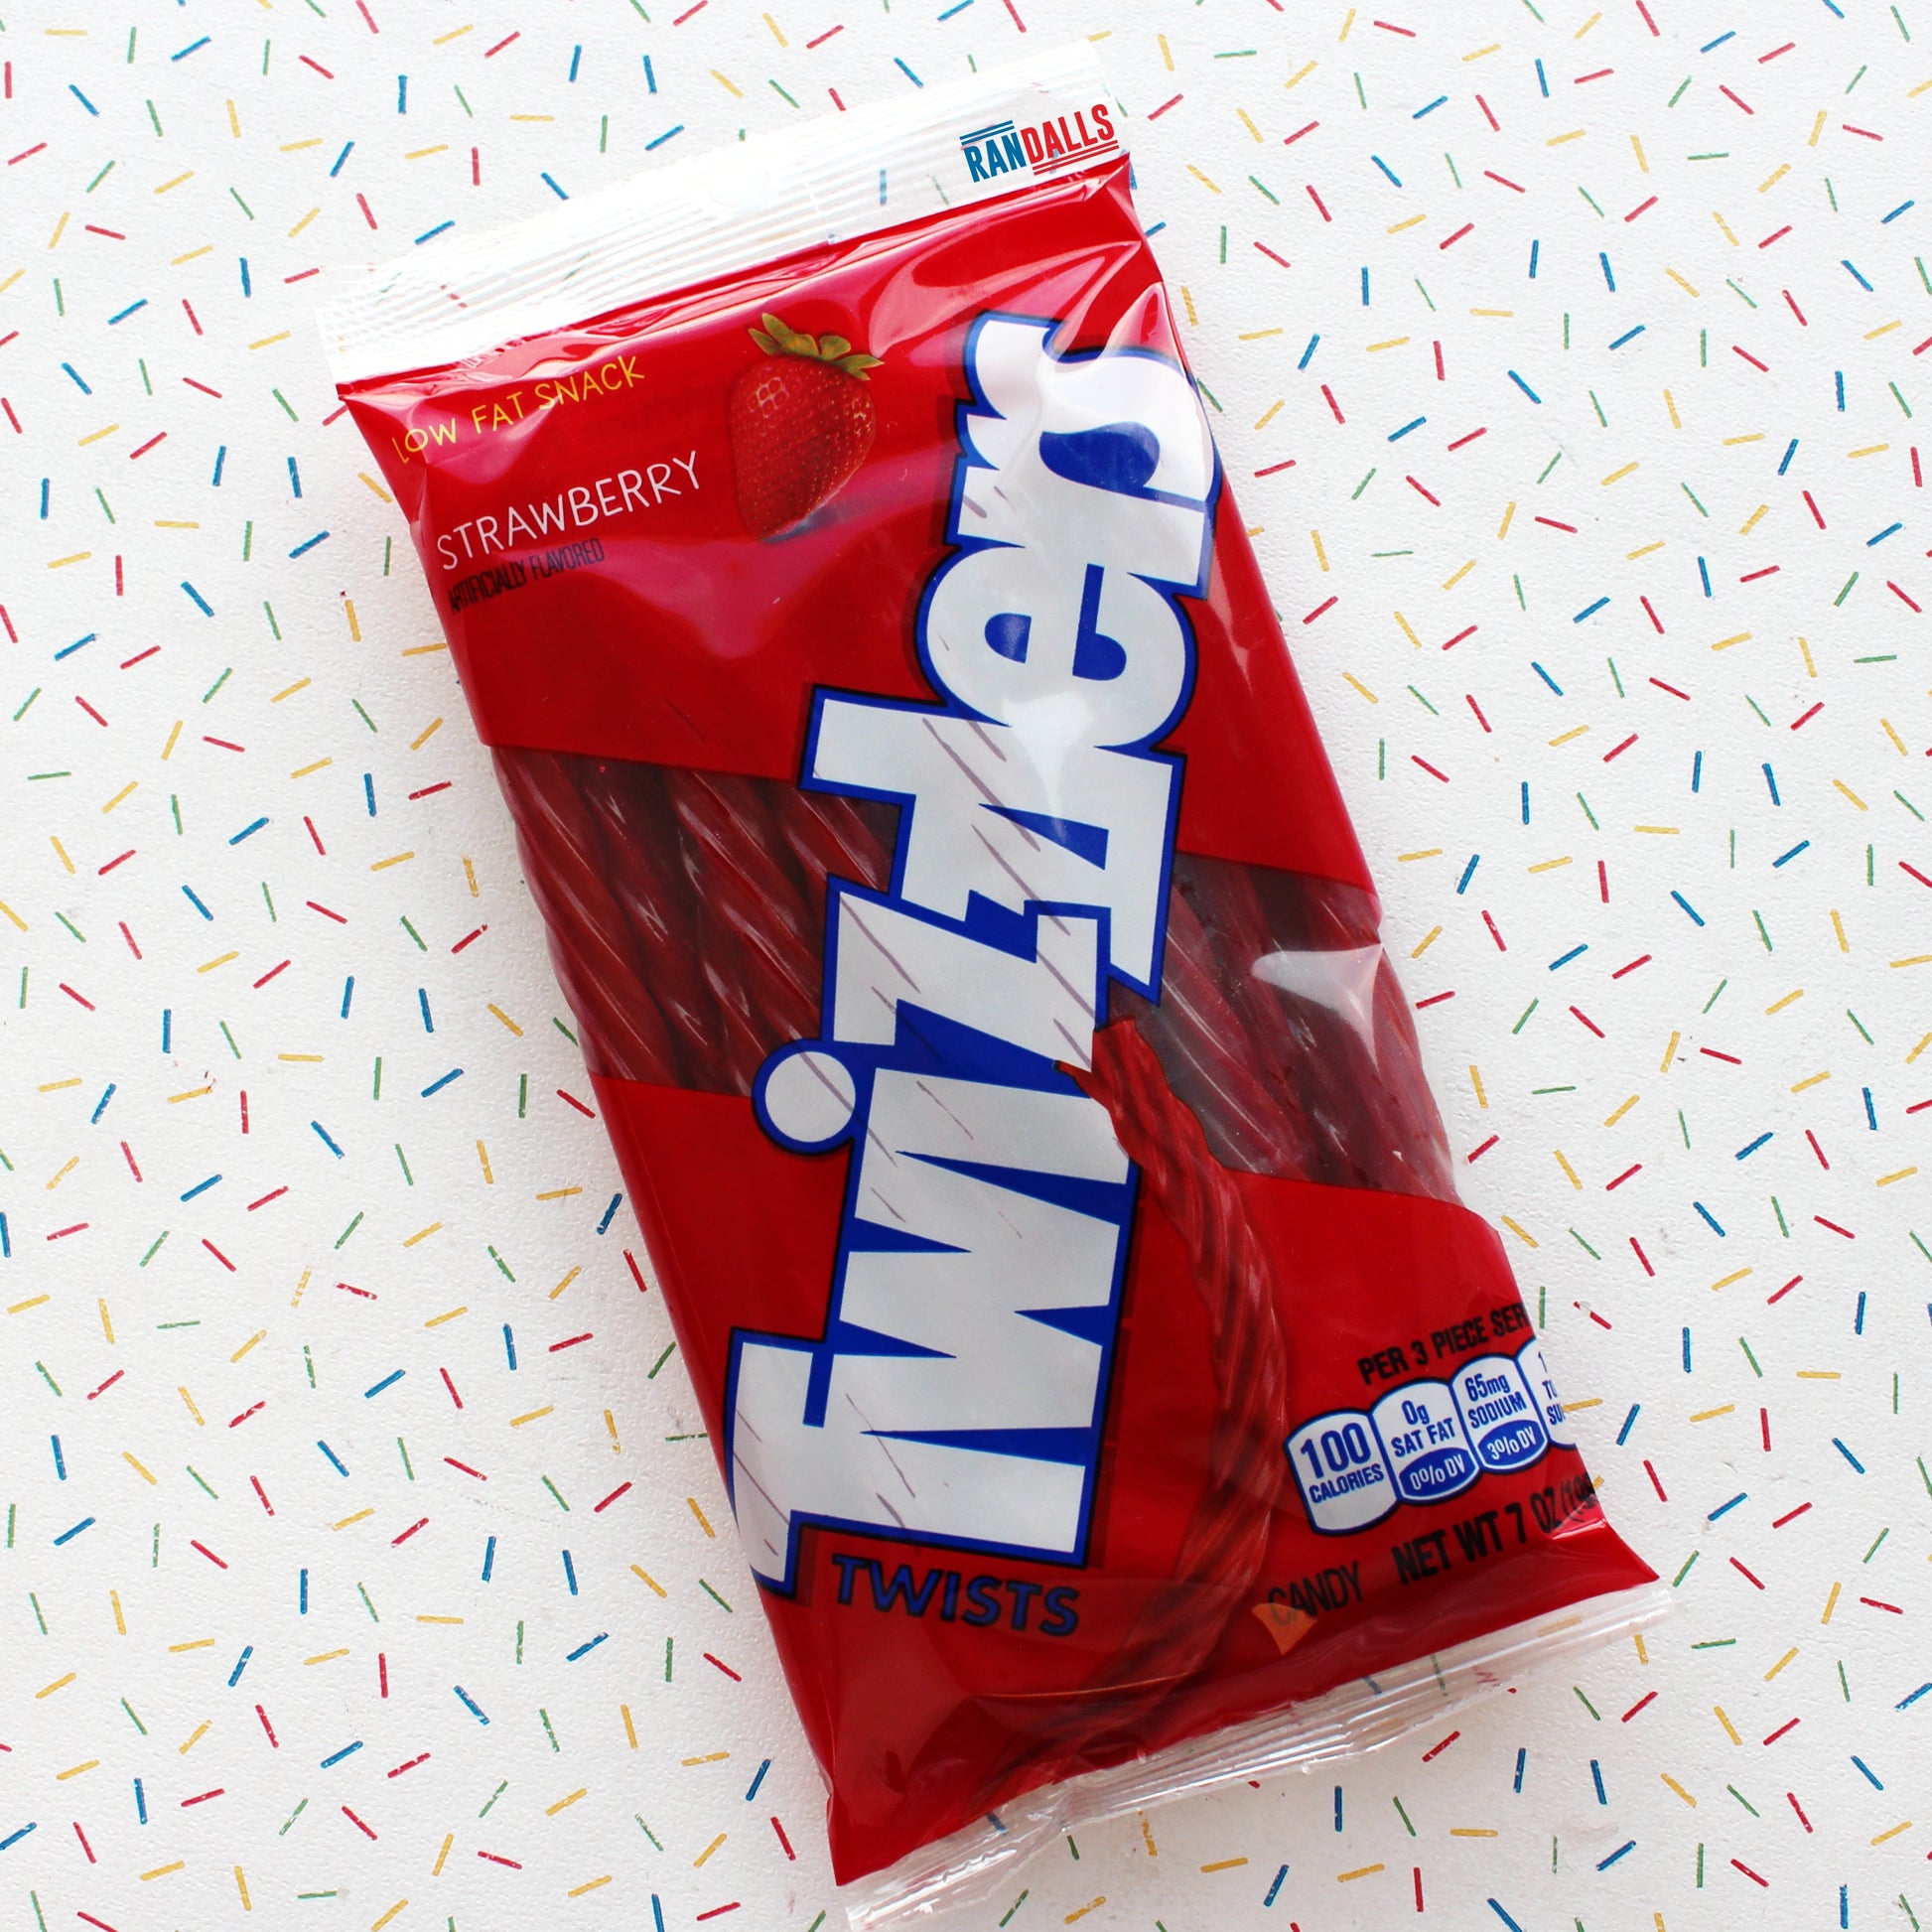 twizzlers, red vines, american licorice, liquorice, american candy, movie theatre, strawberry twizzlers, randallstwizzlers strawberry, twists sweets, candy, low fat, chewy, gummy